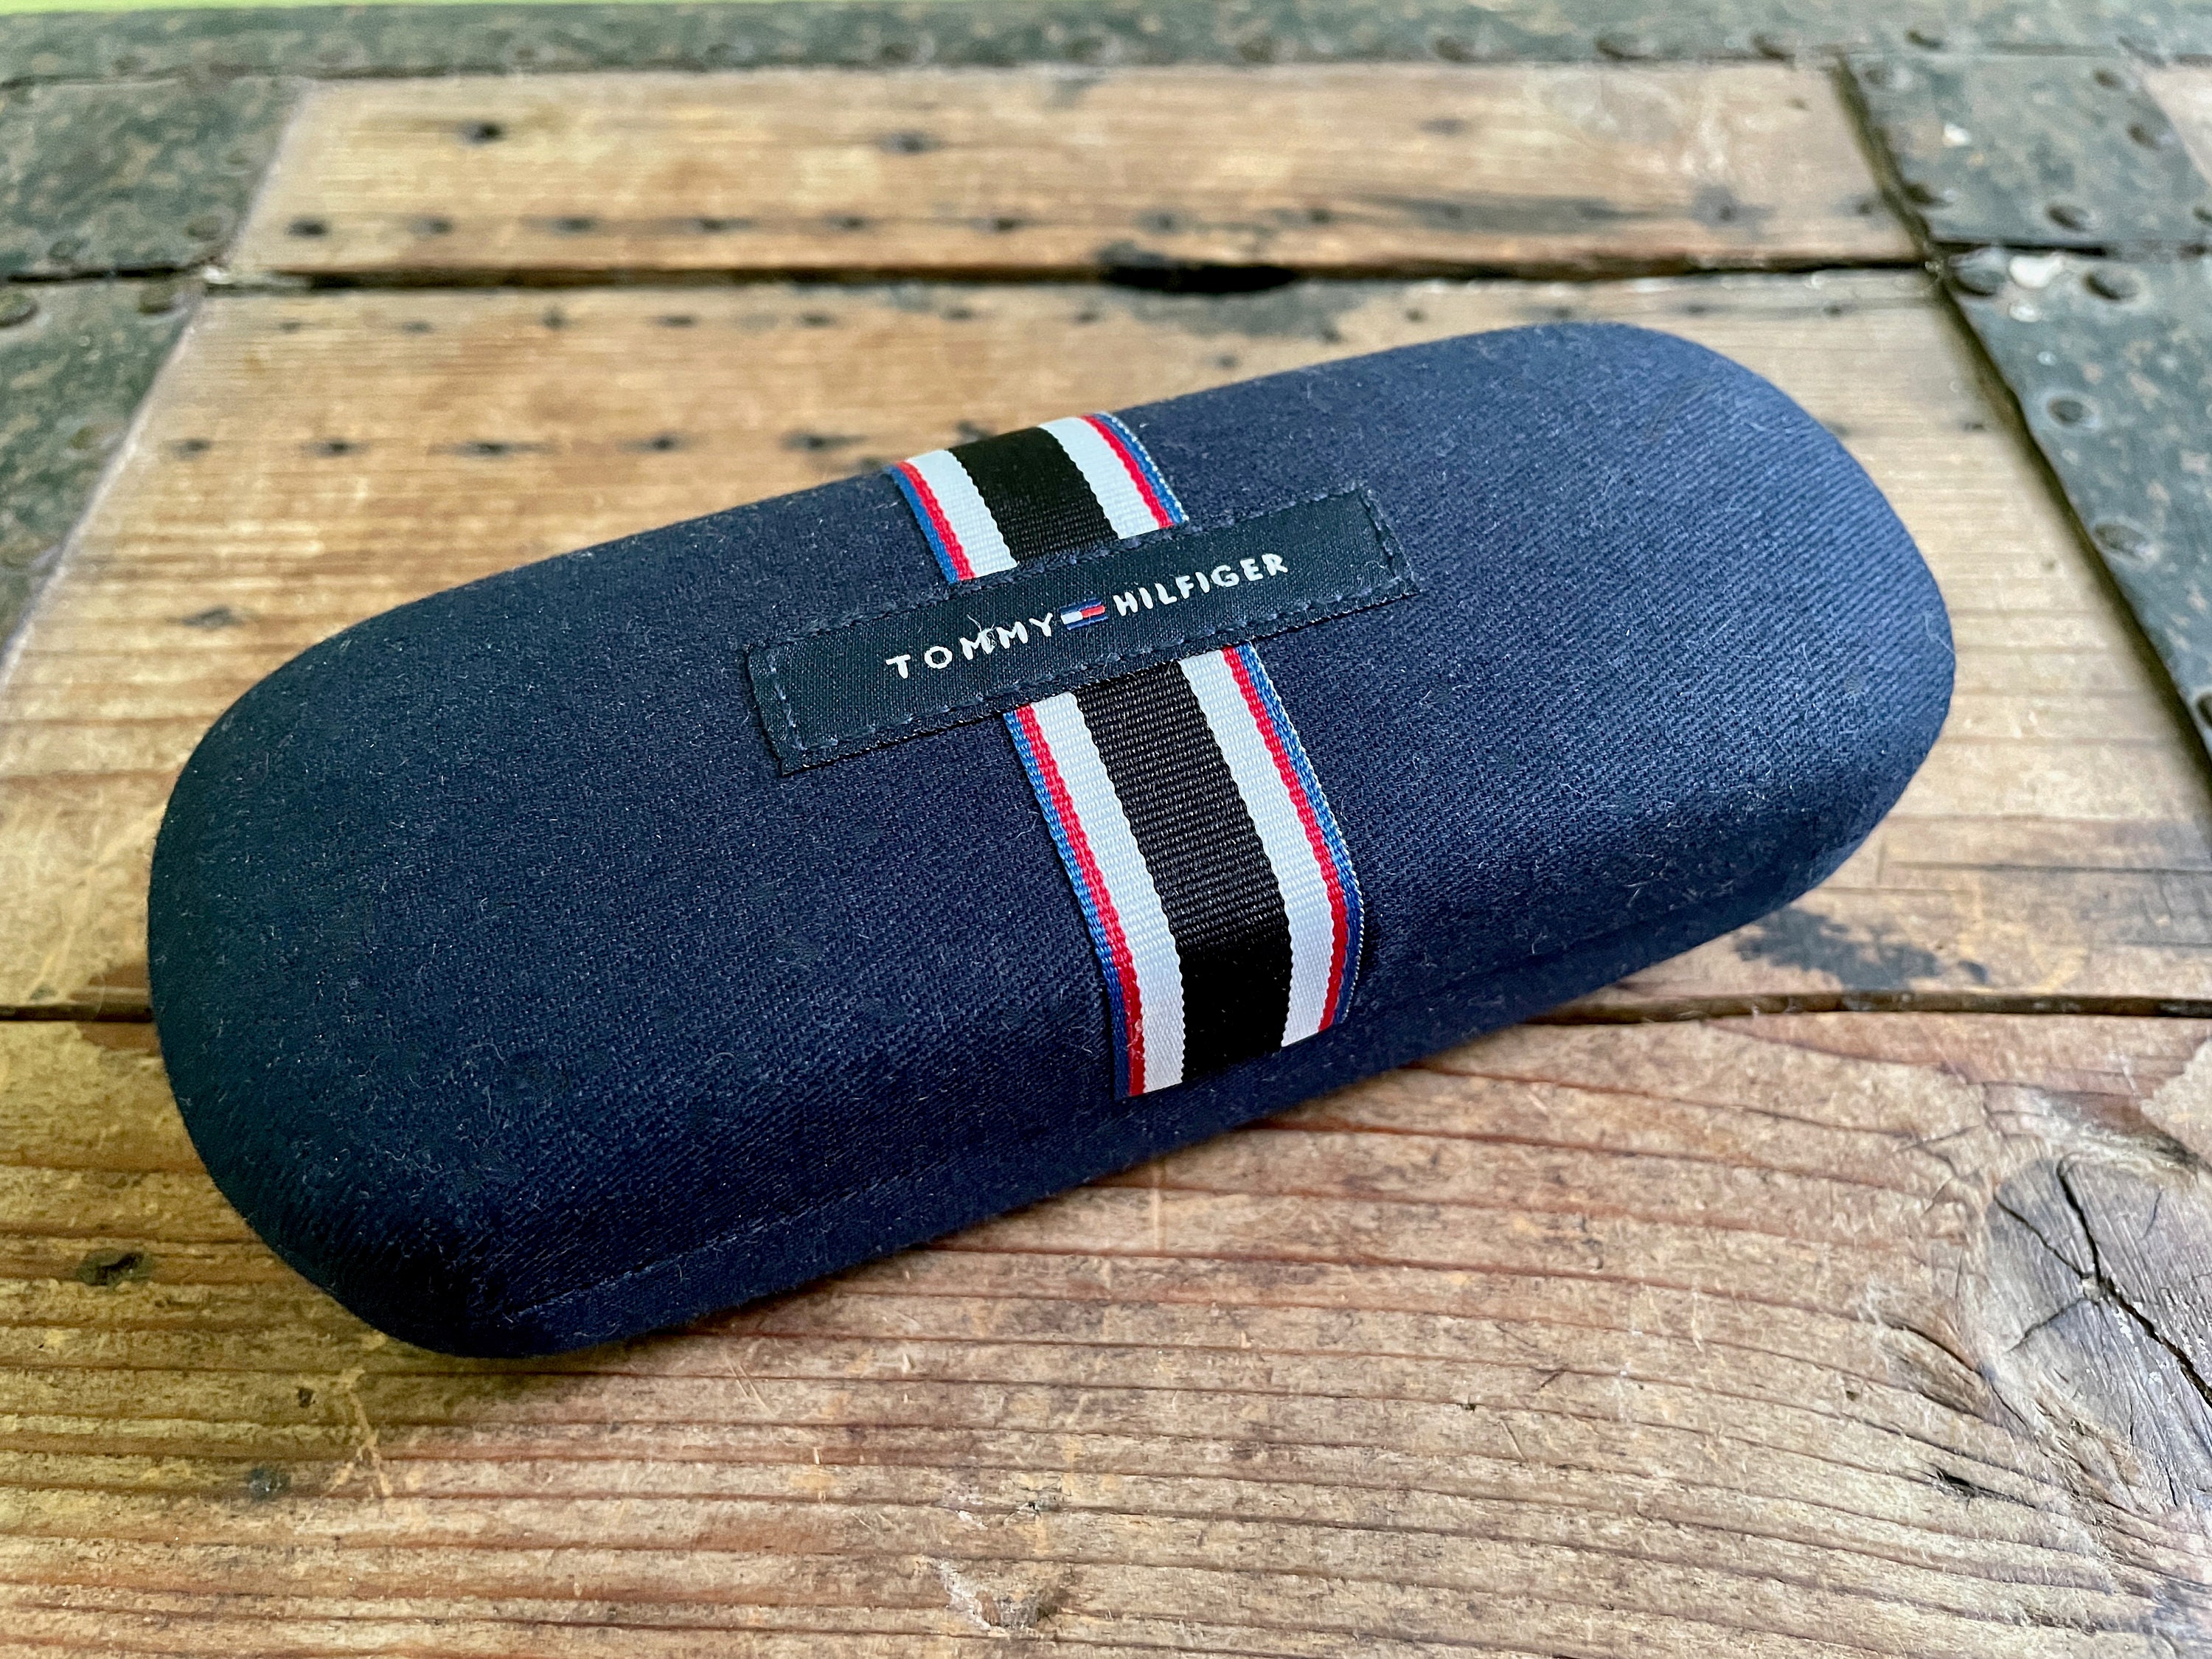 Governable Hobart Ligegyldighed Tommy Hilfiger Sunglass Reading Glass Case OOAK - Etsy